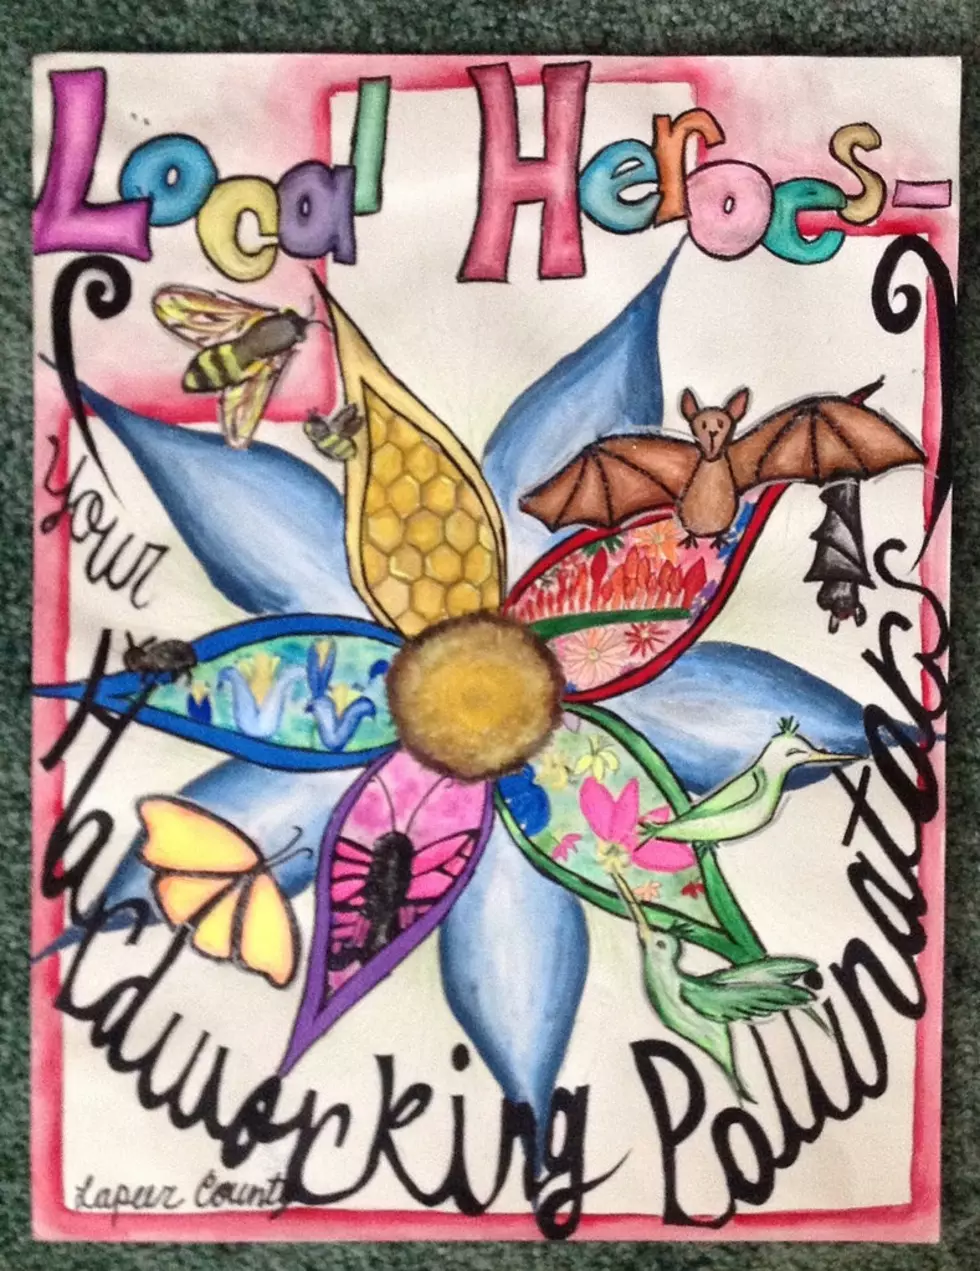 Lapeer County Junior Places Third in National Poster Contest